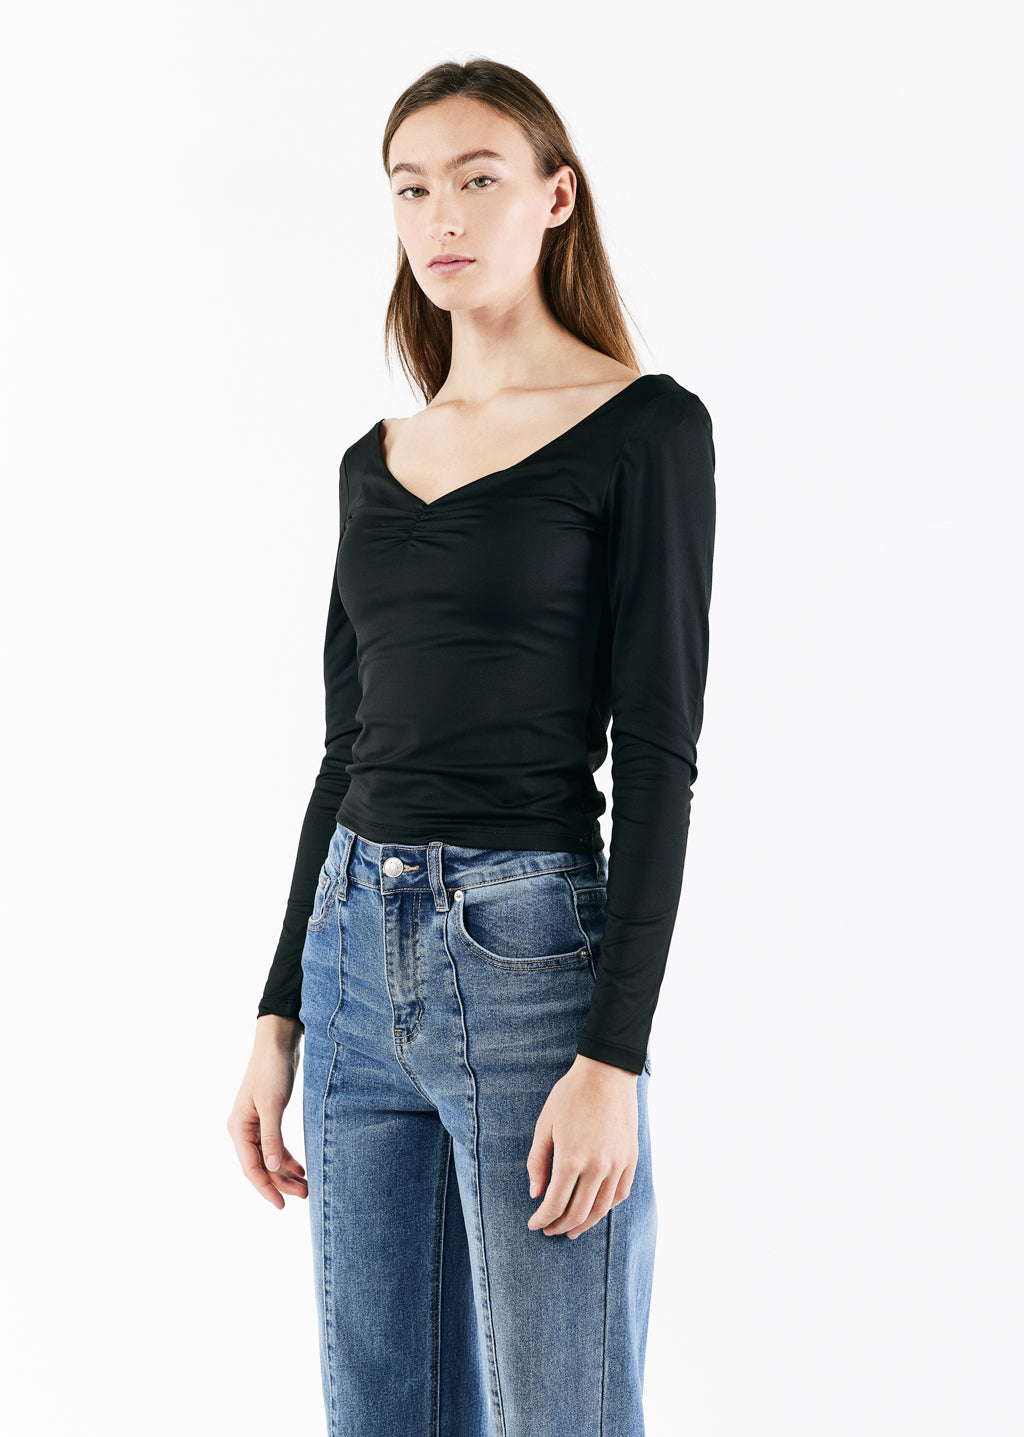 90 S Style V-Neck Top